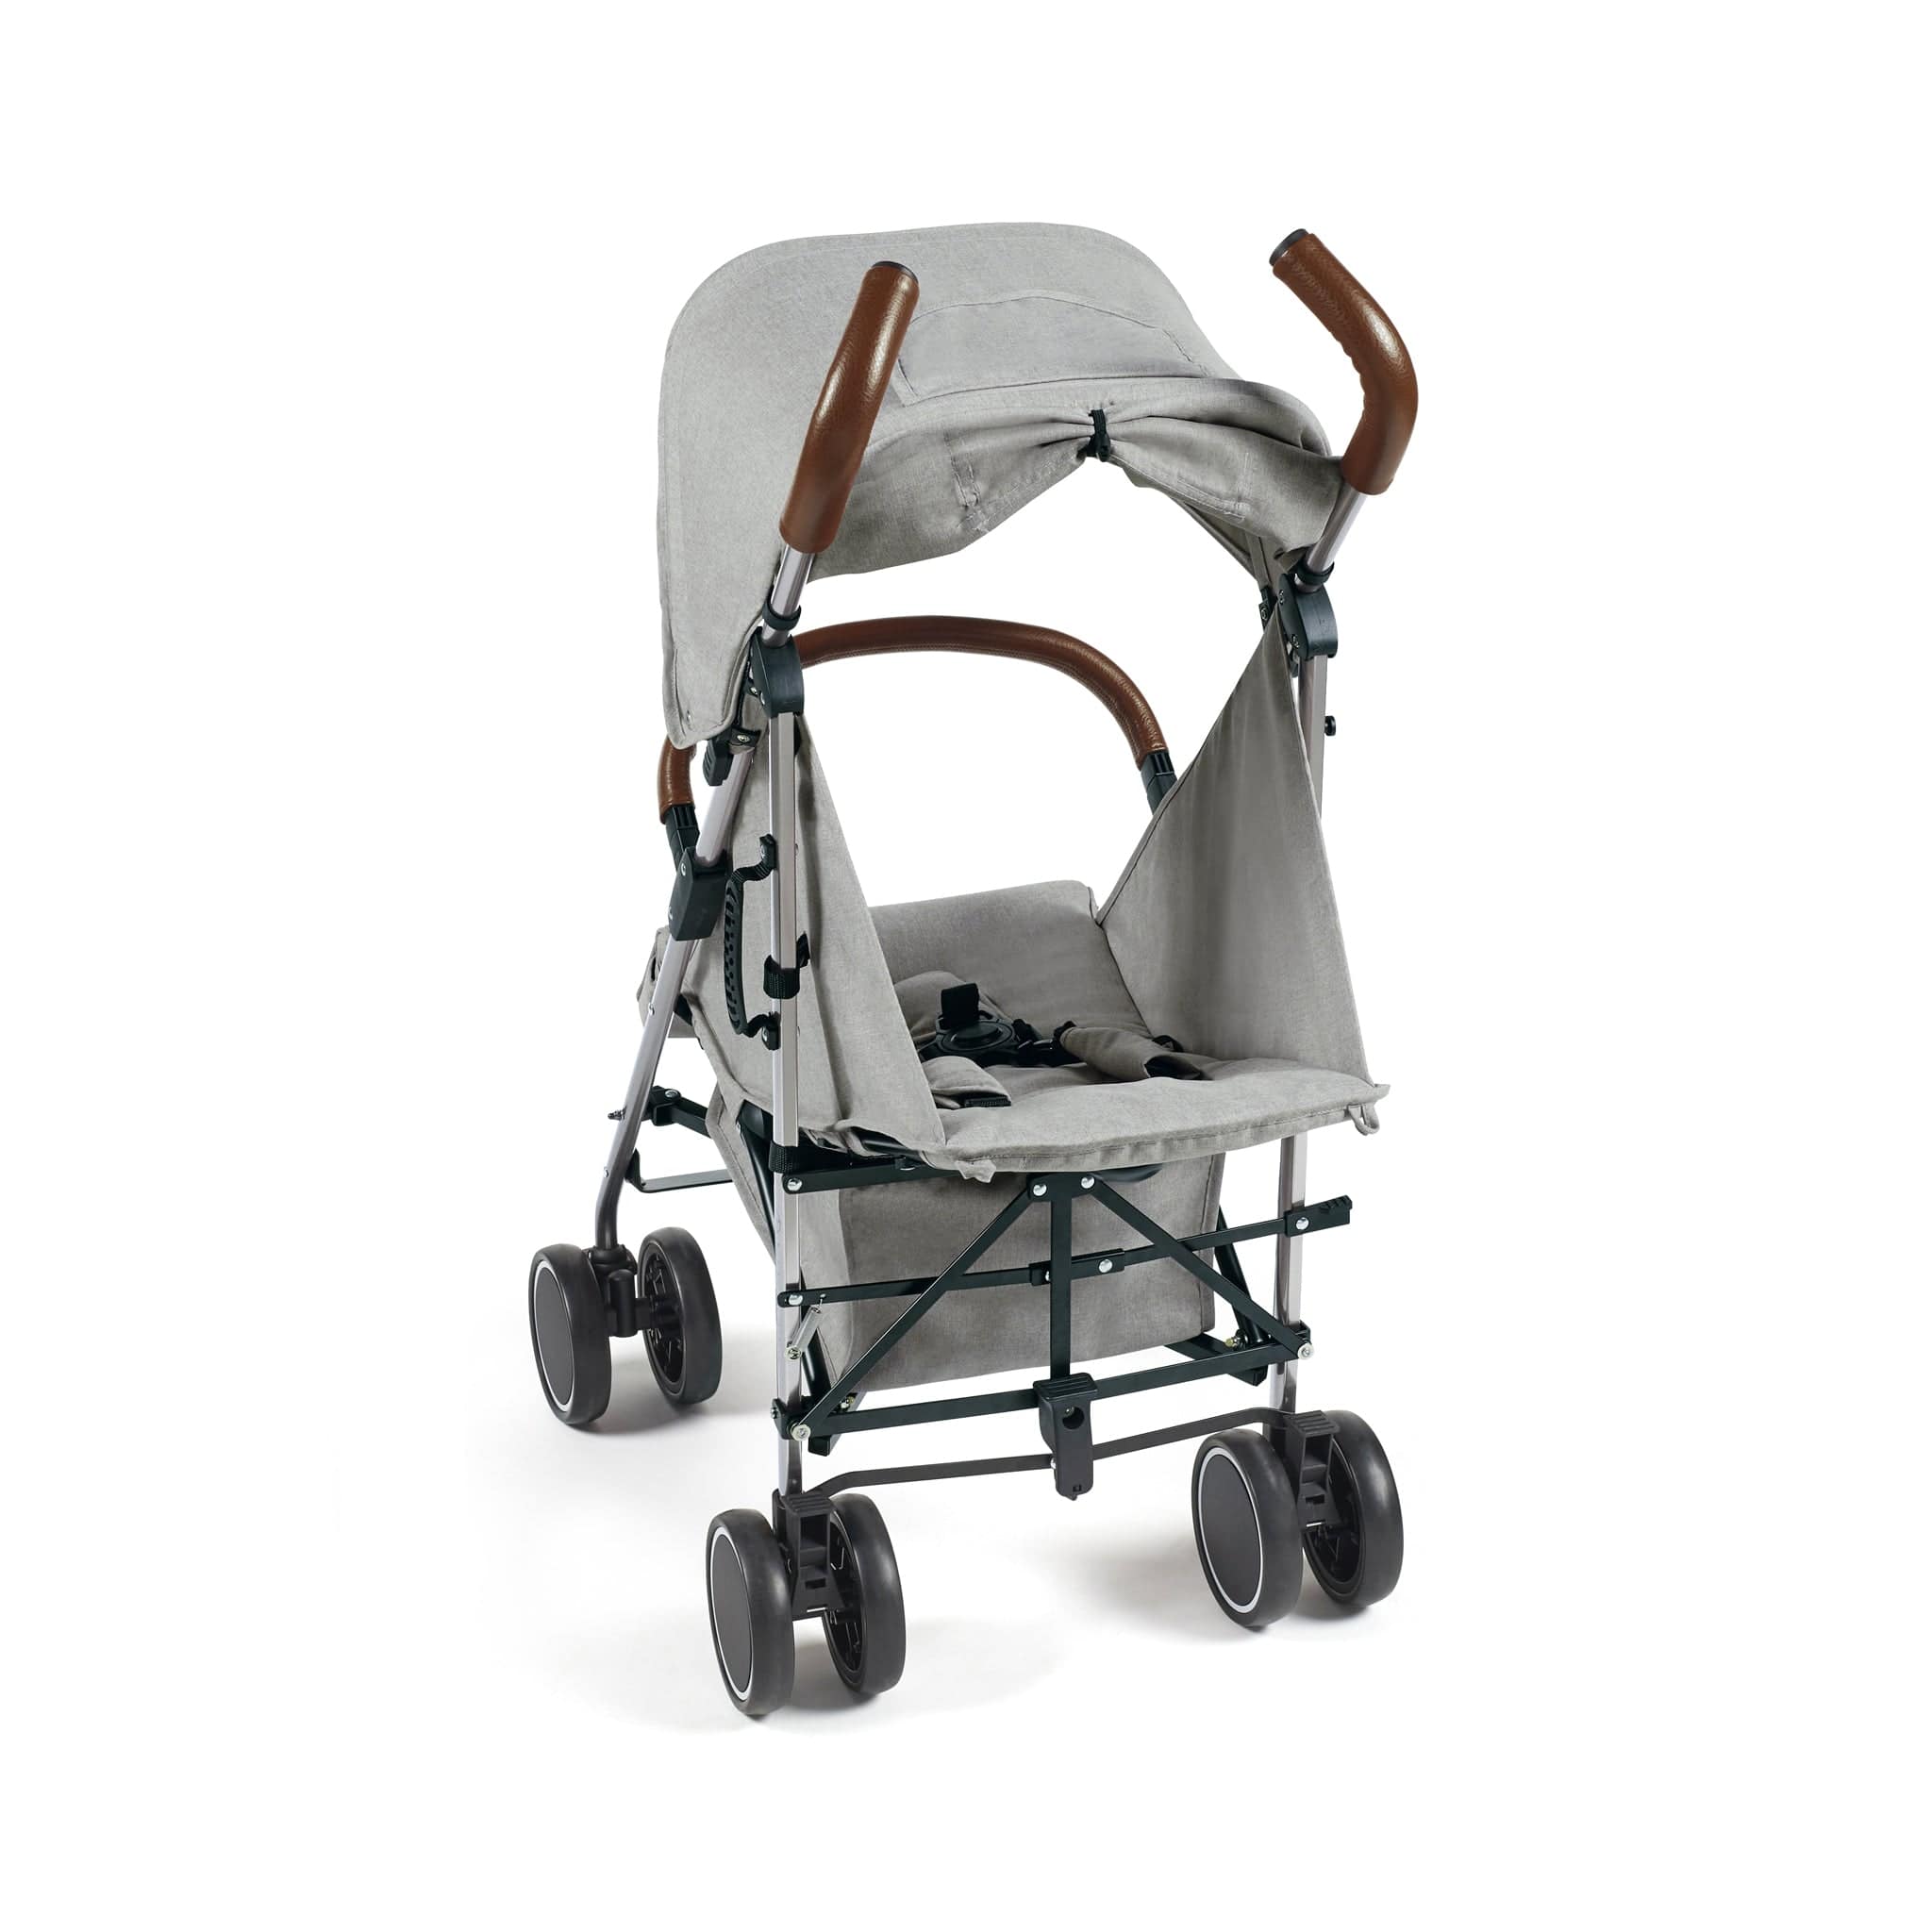 Ickle Bubba Discovery Stroller Silver/Grey Pushchairs & Buggies 15-002-100-056 0700355999065